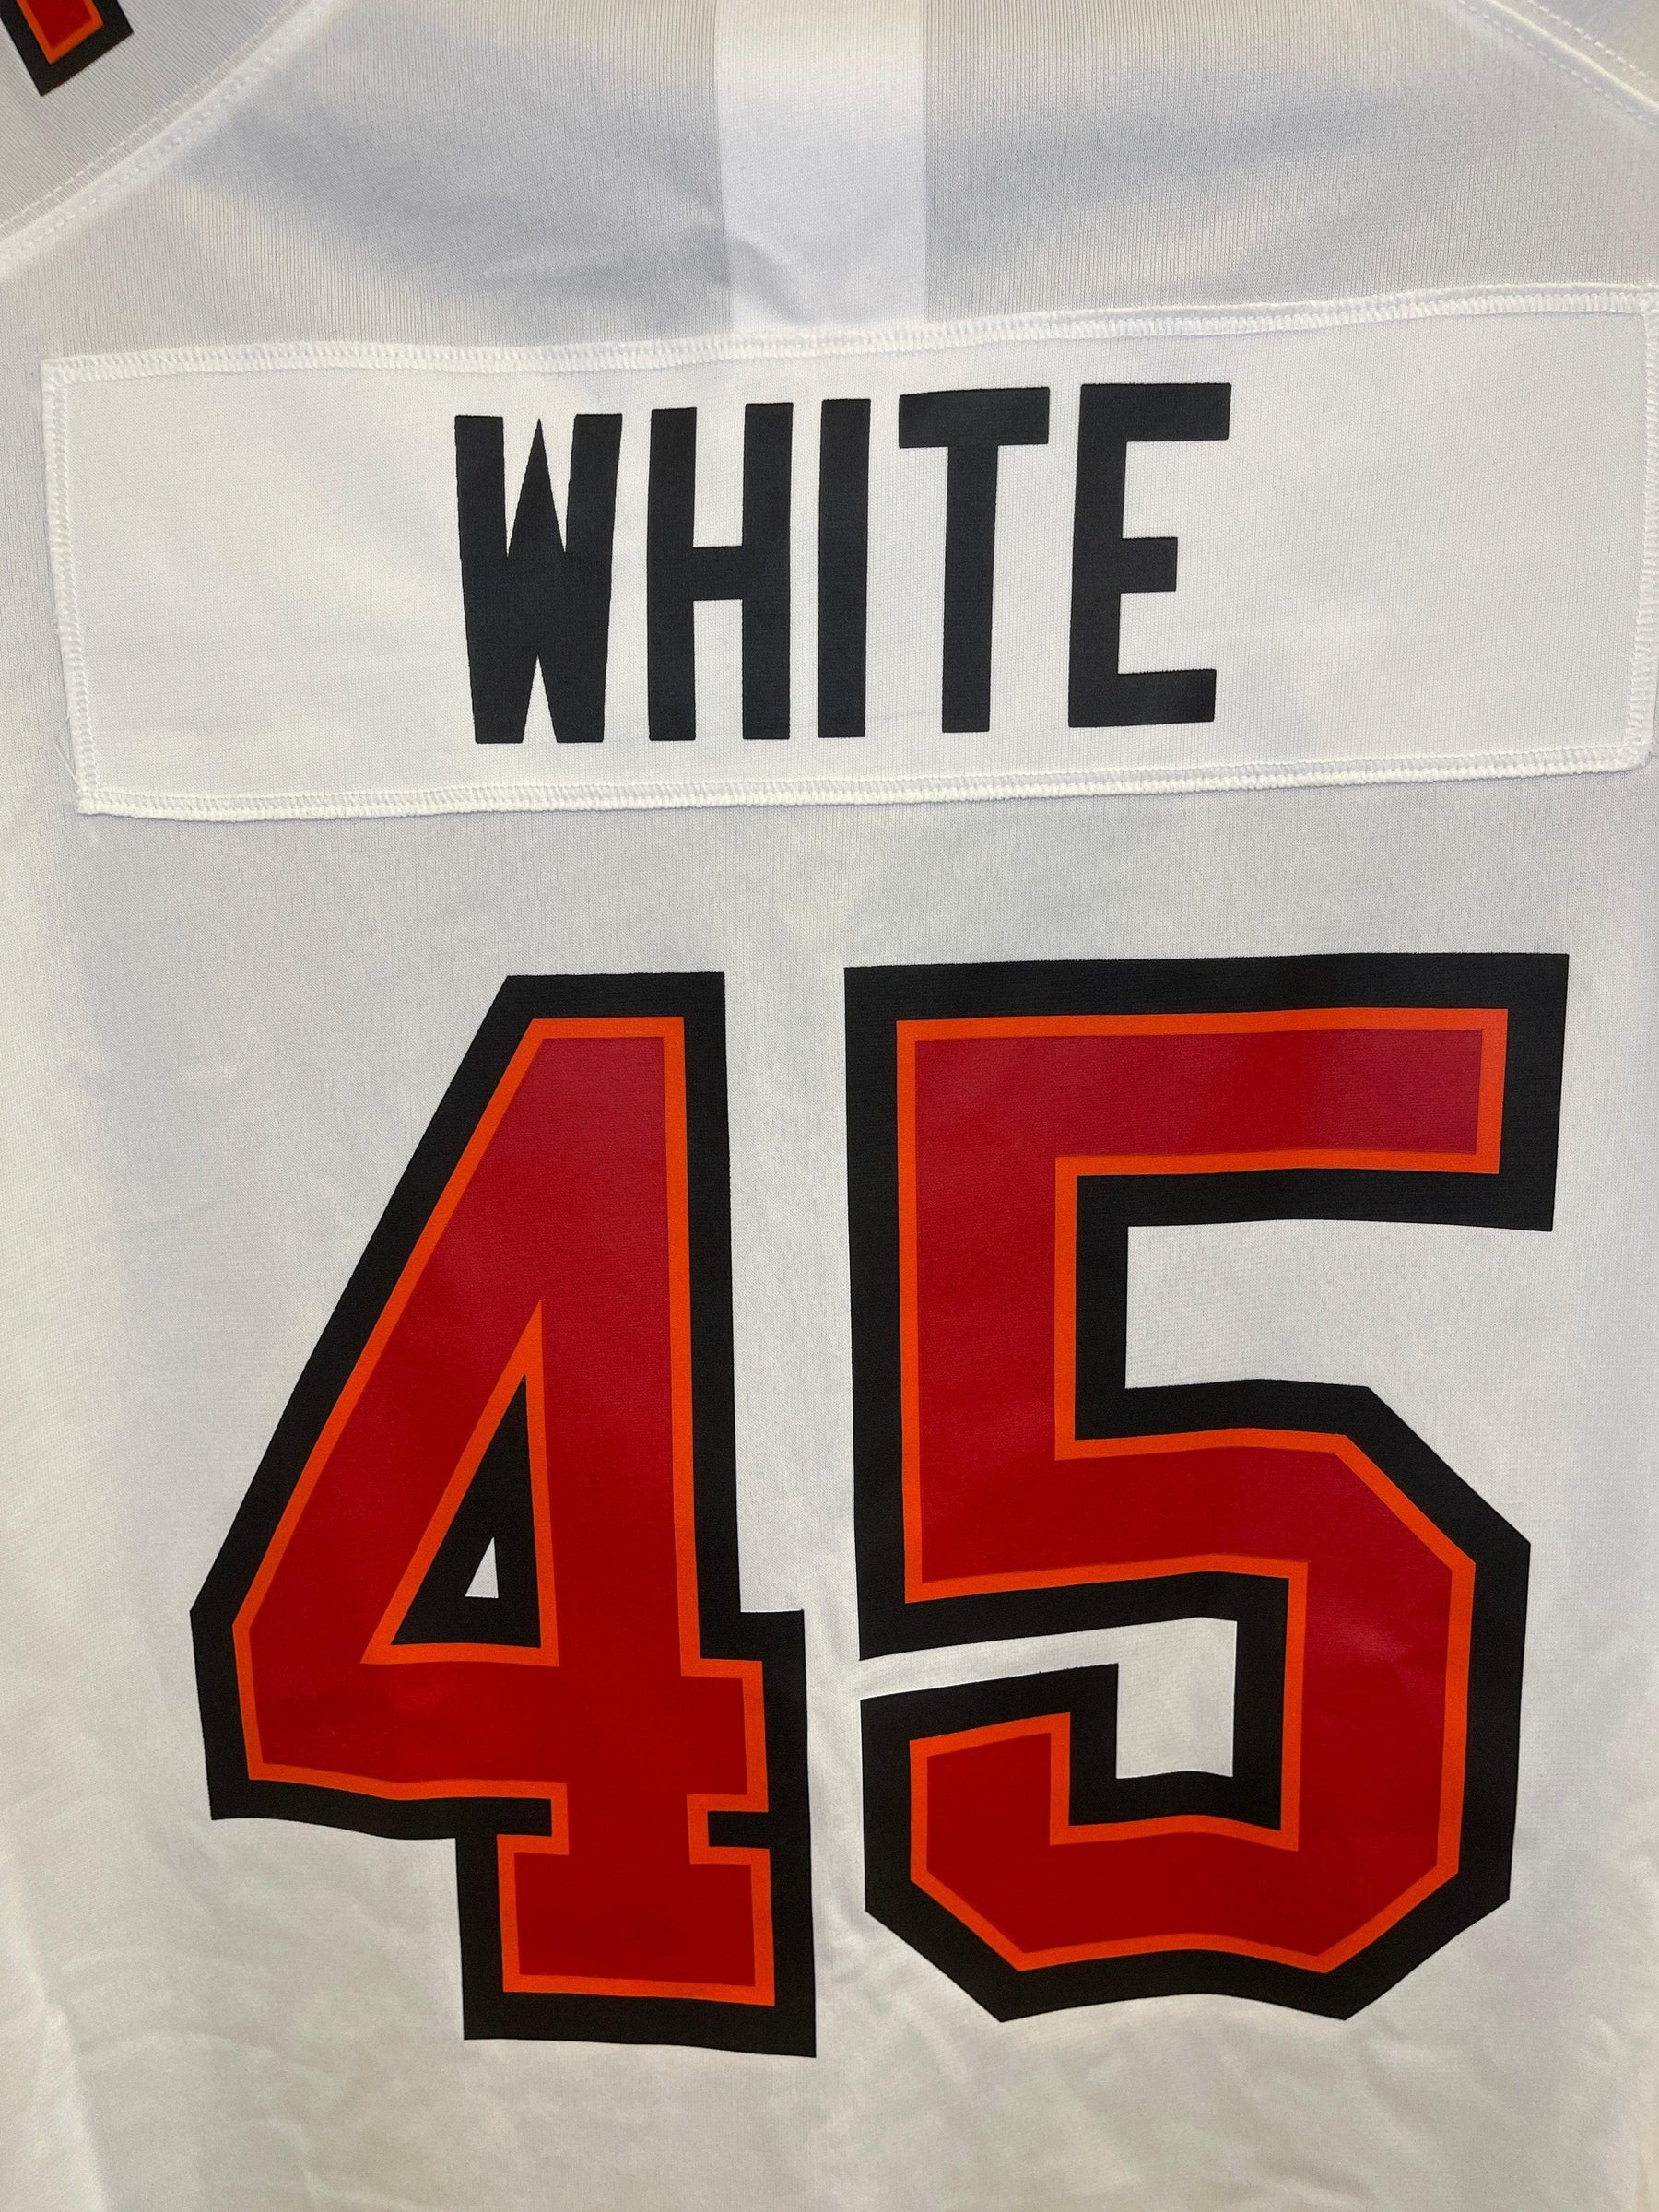 NFL Tampa Bay Buccaneers Devin White #45 Game Jersey Men's X-Large NWT